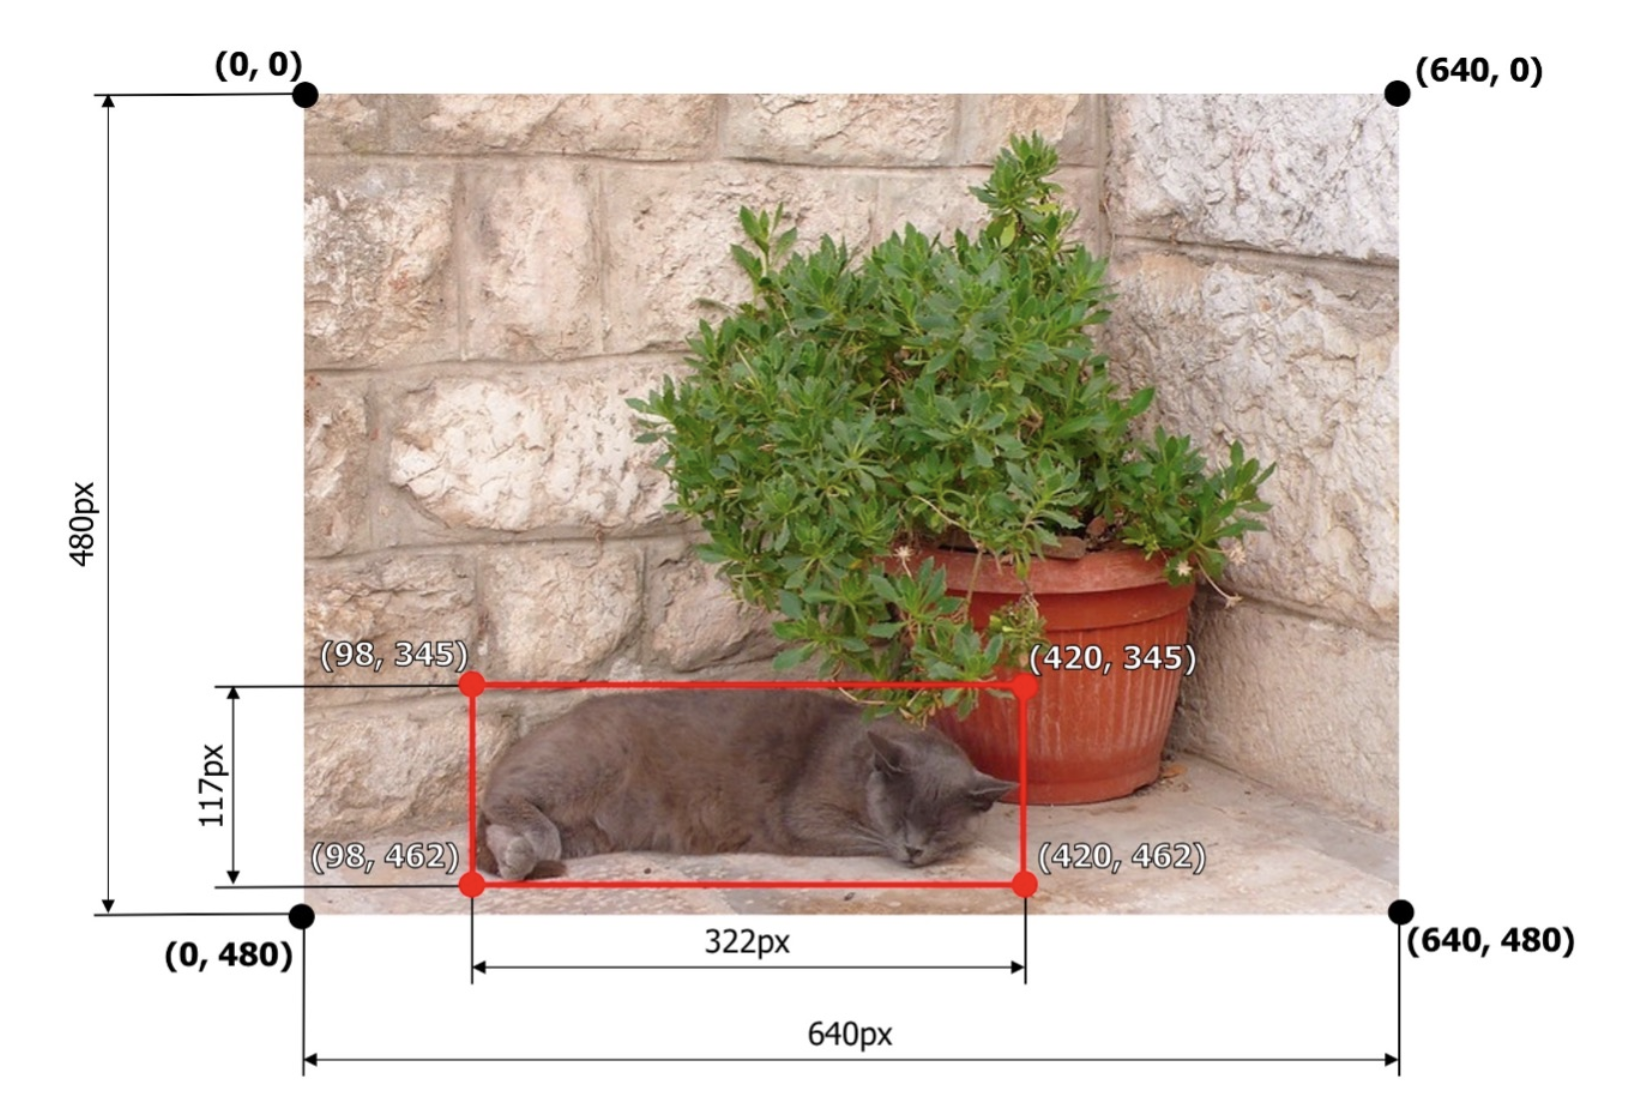 An image of a cat and a potted plant showing different bounding box formats, including COCO, YOLO, Albumentations, and Pascal VOC